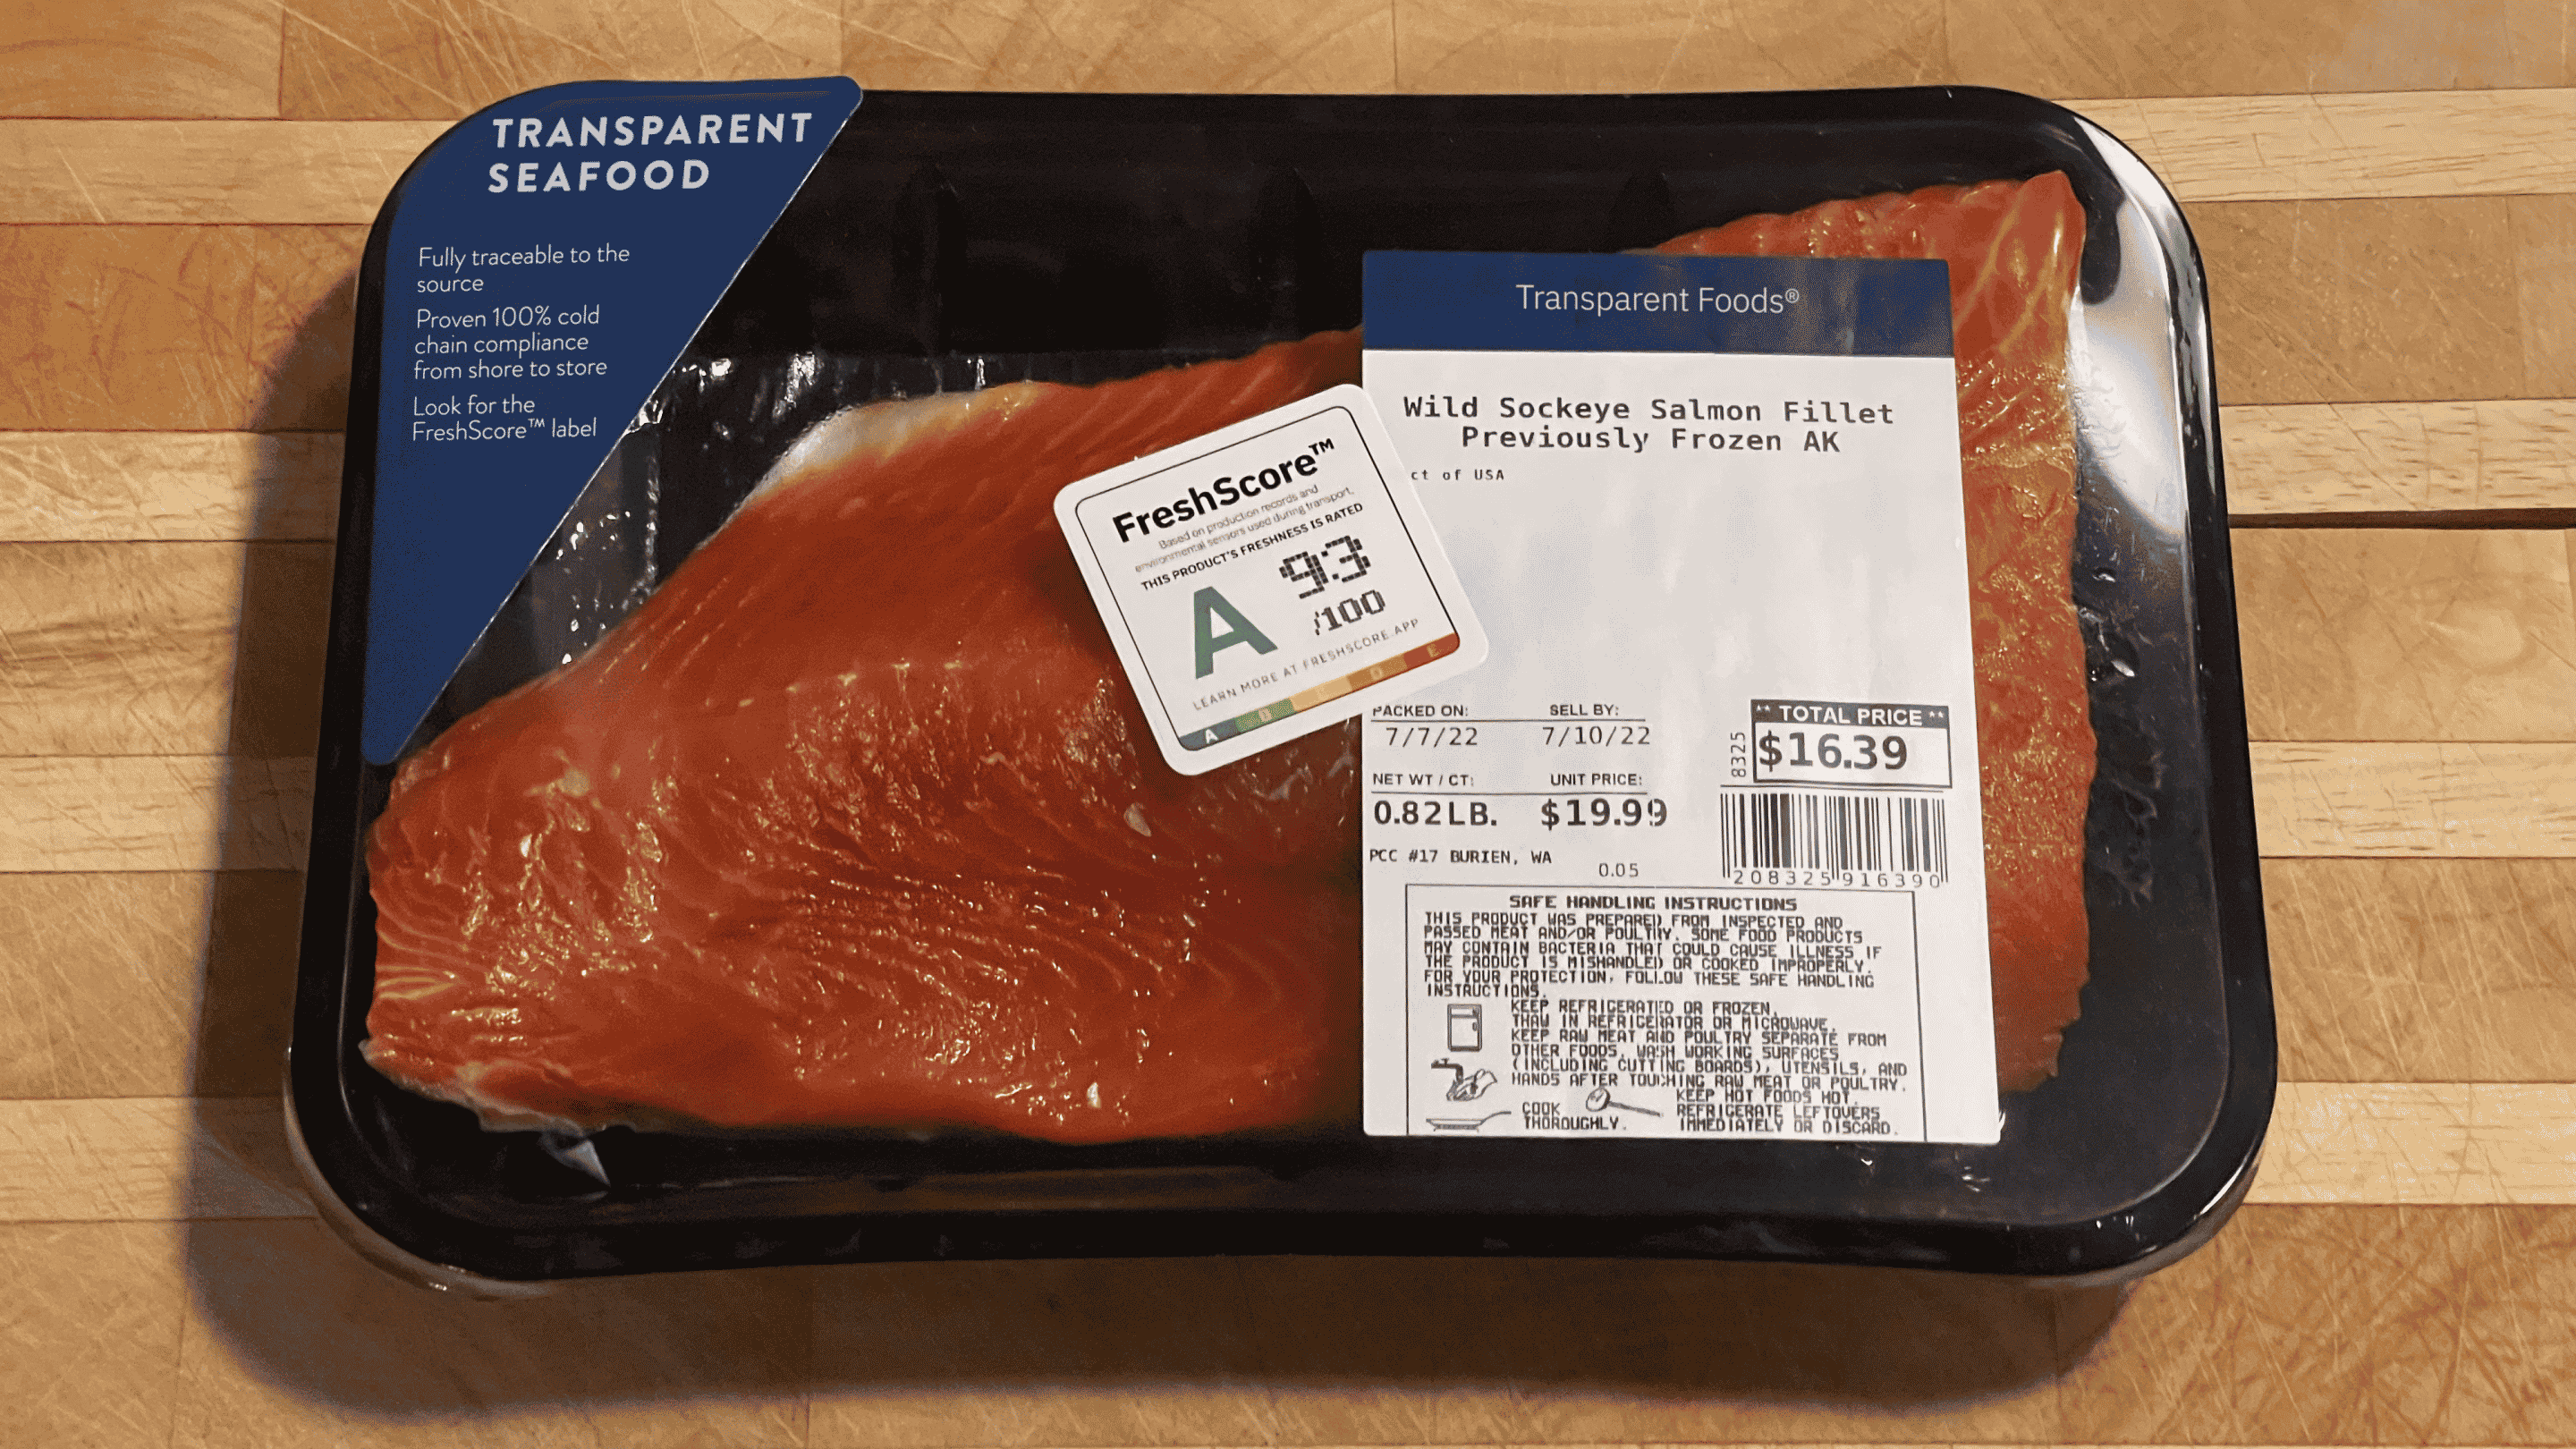 Photo of a salmon fillet with a FreshScore™ rating